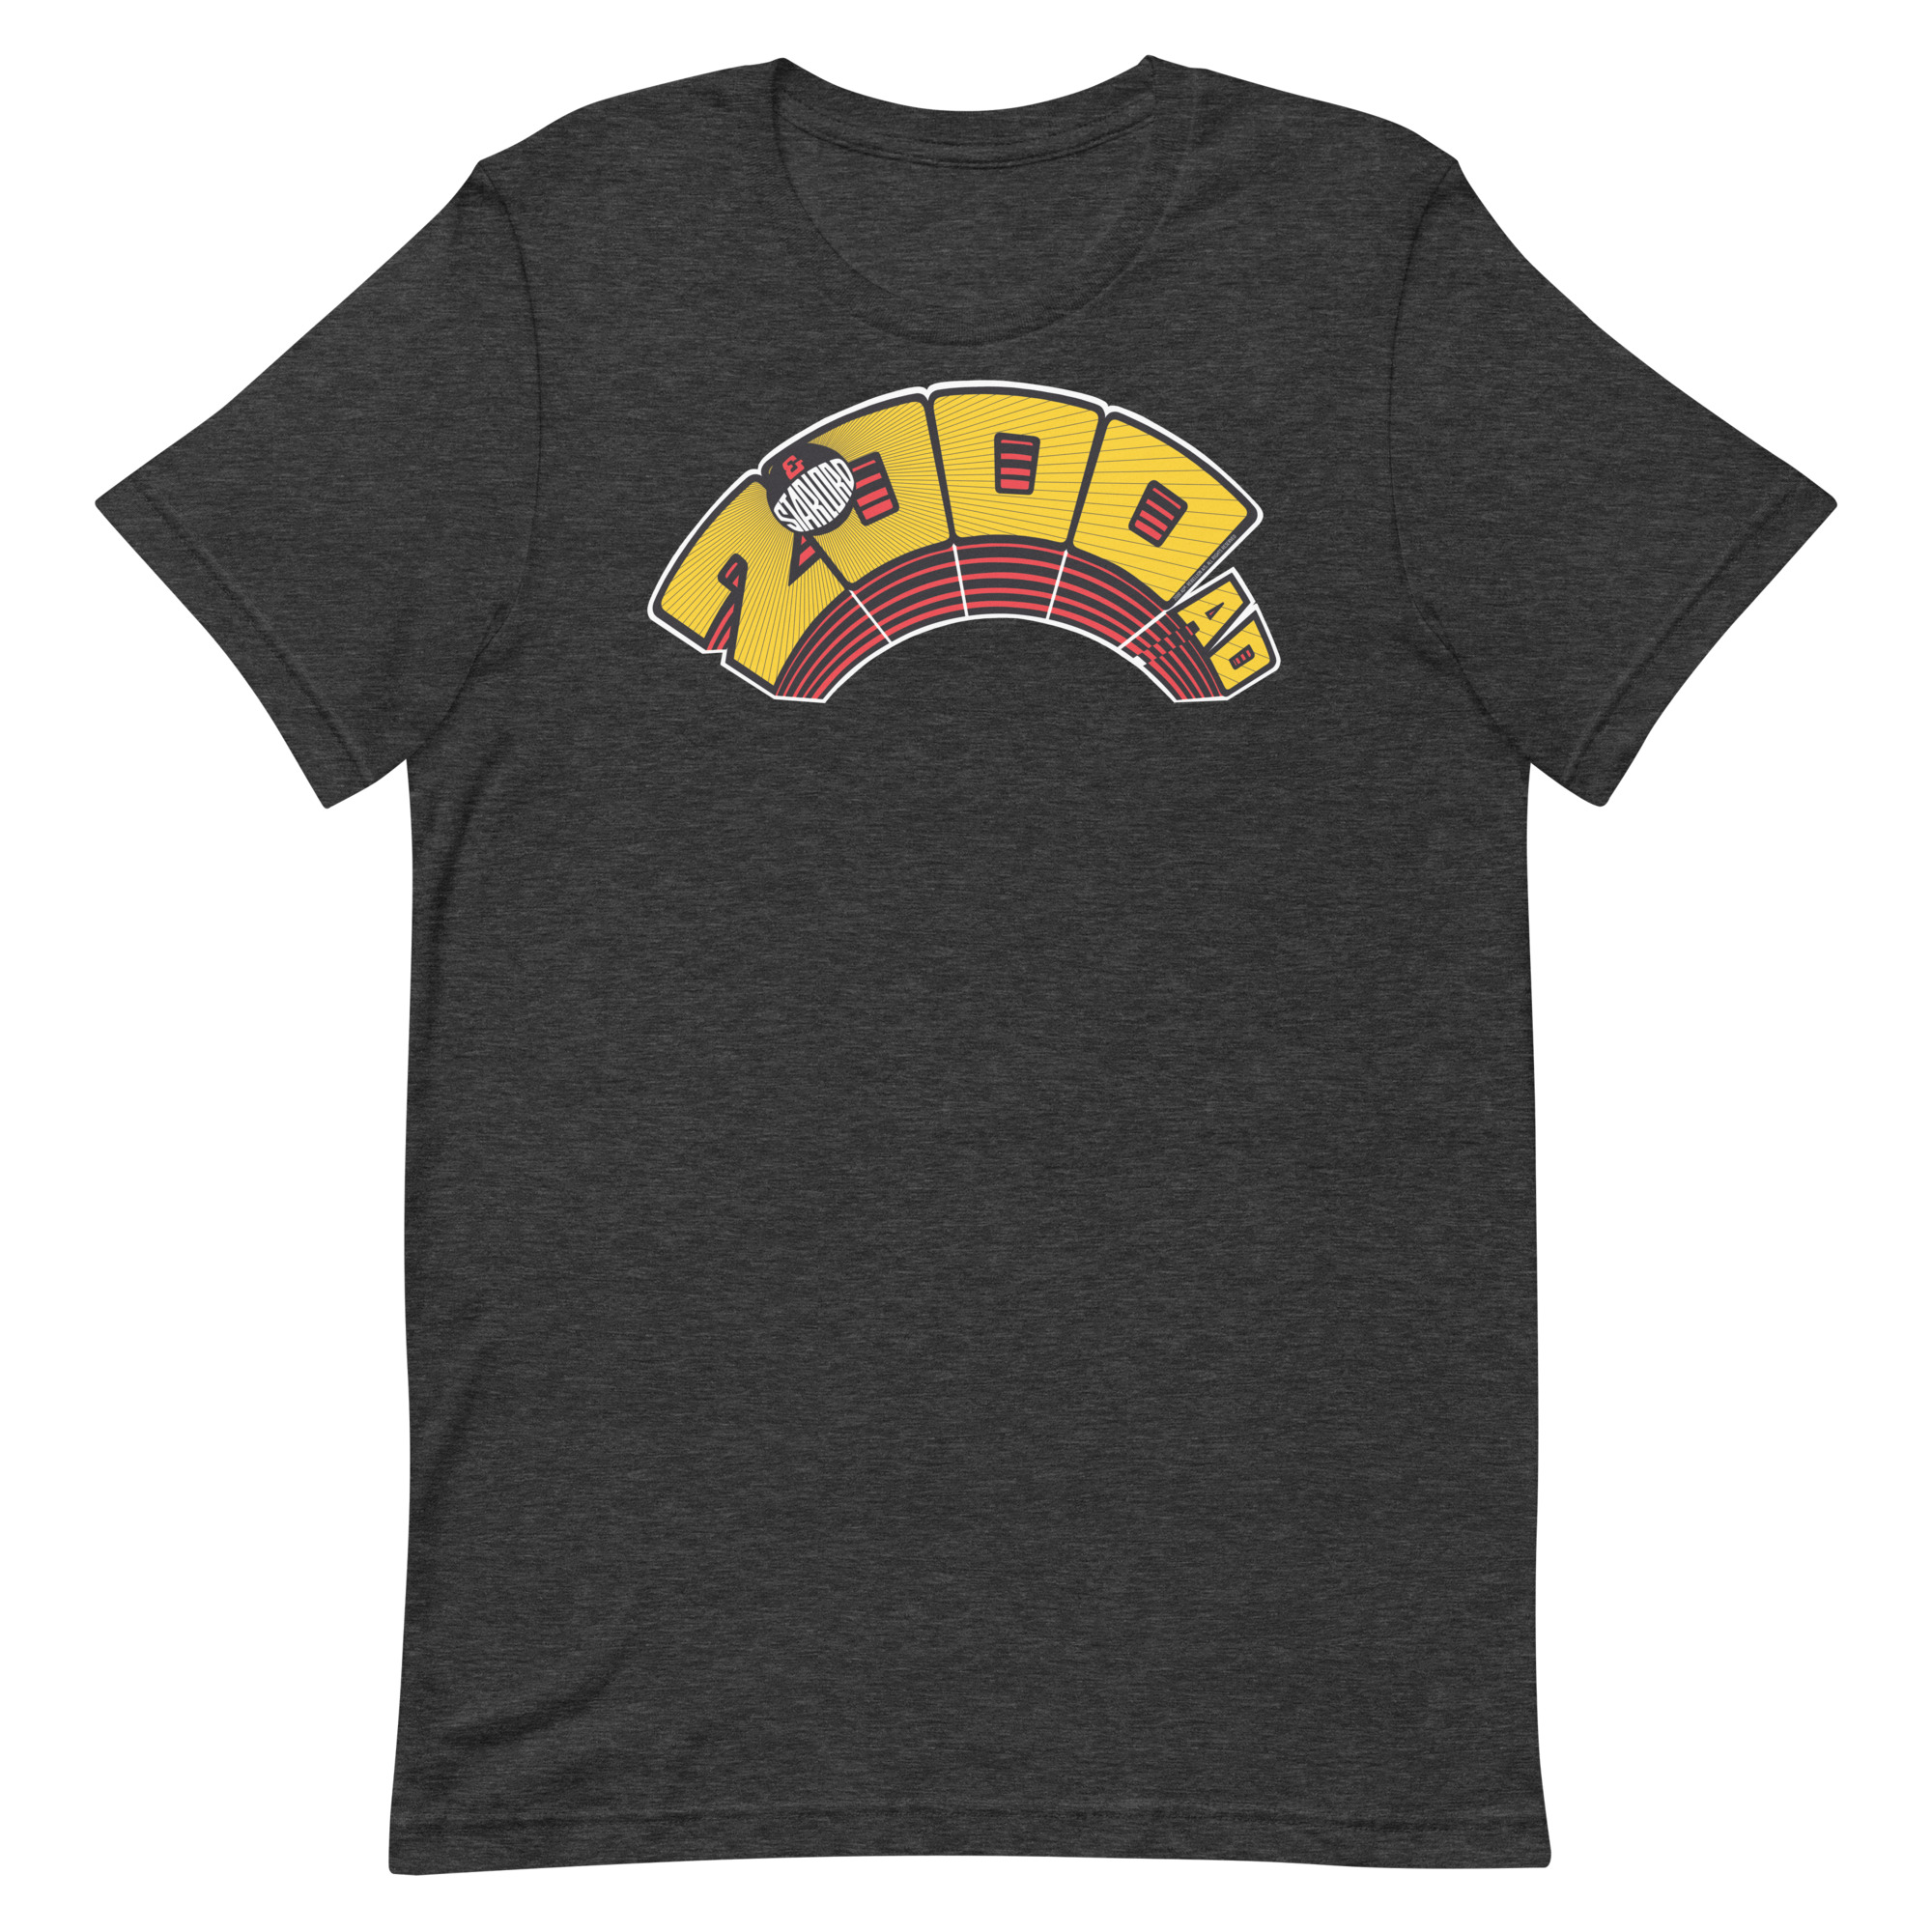 Image of a Dark Grey Heather coloured 2000AD Starlord Arch t-shirt featuring a large 2000AD Starlord Arch logo in the middle